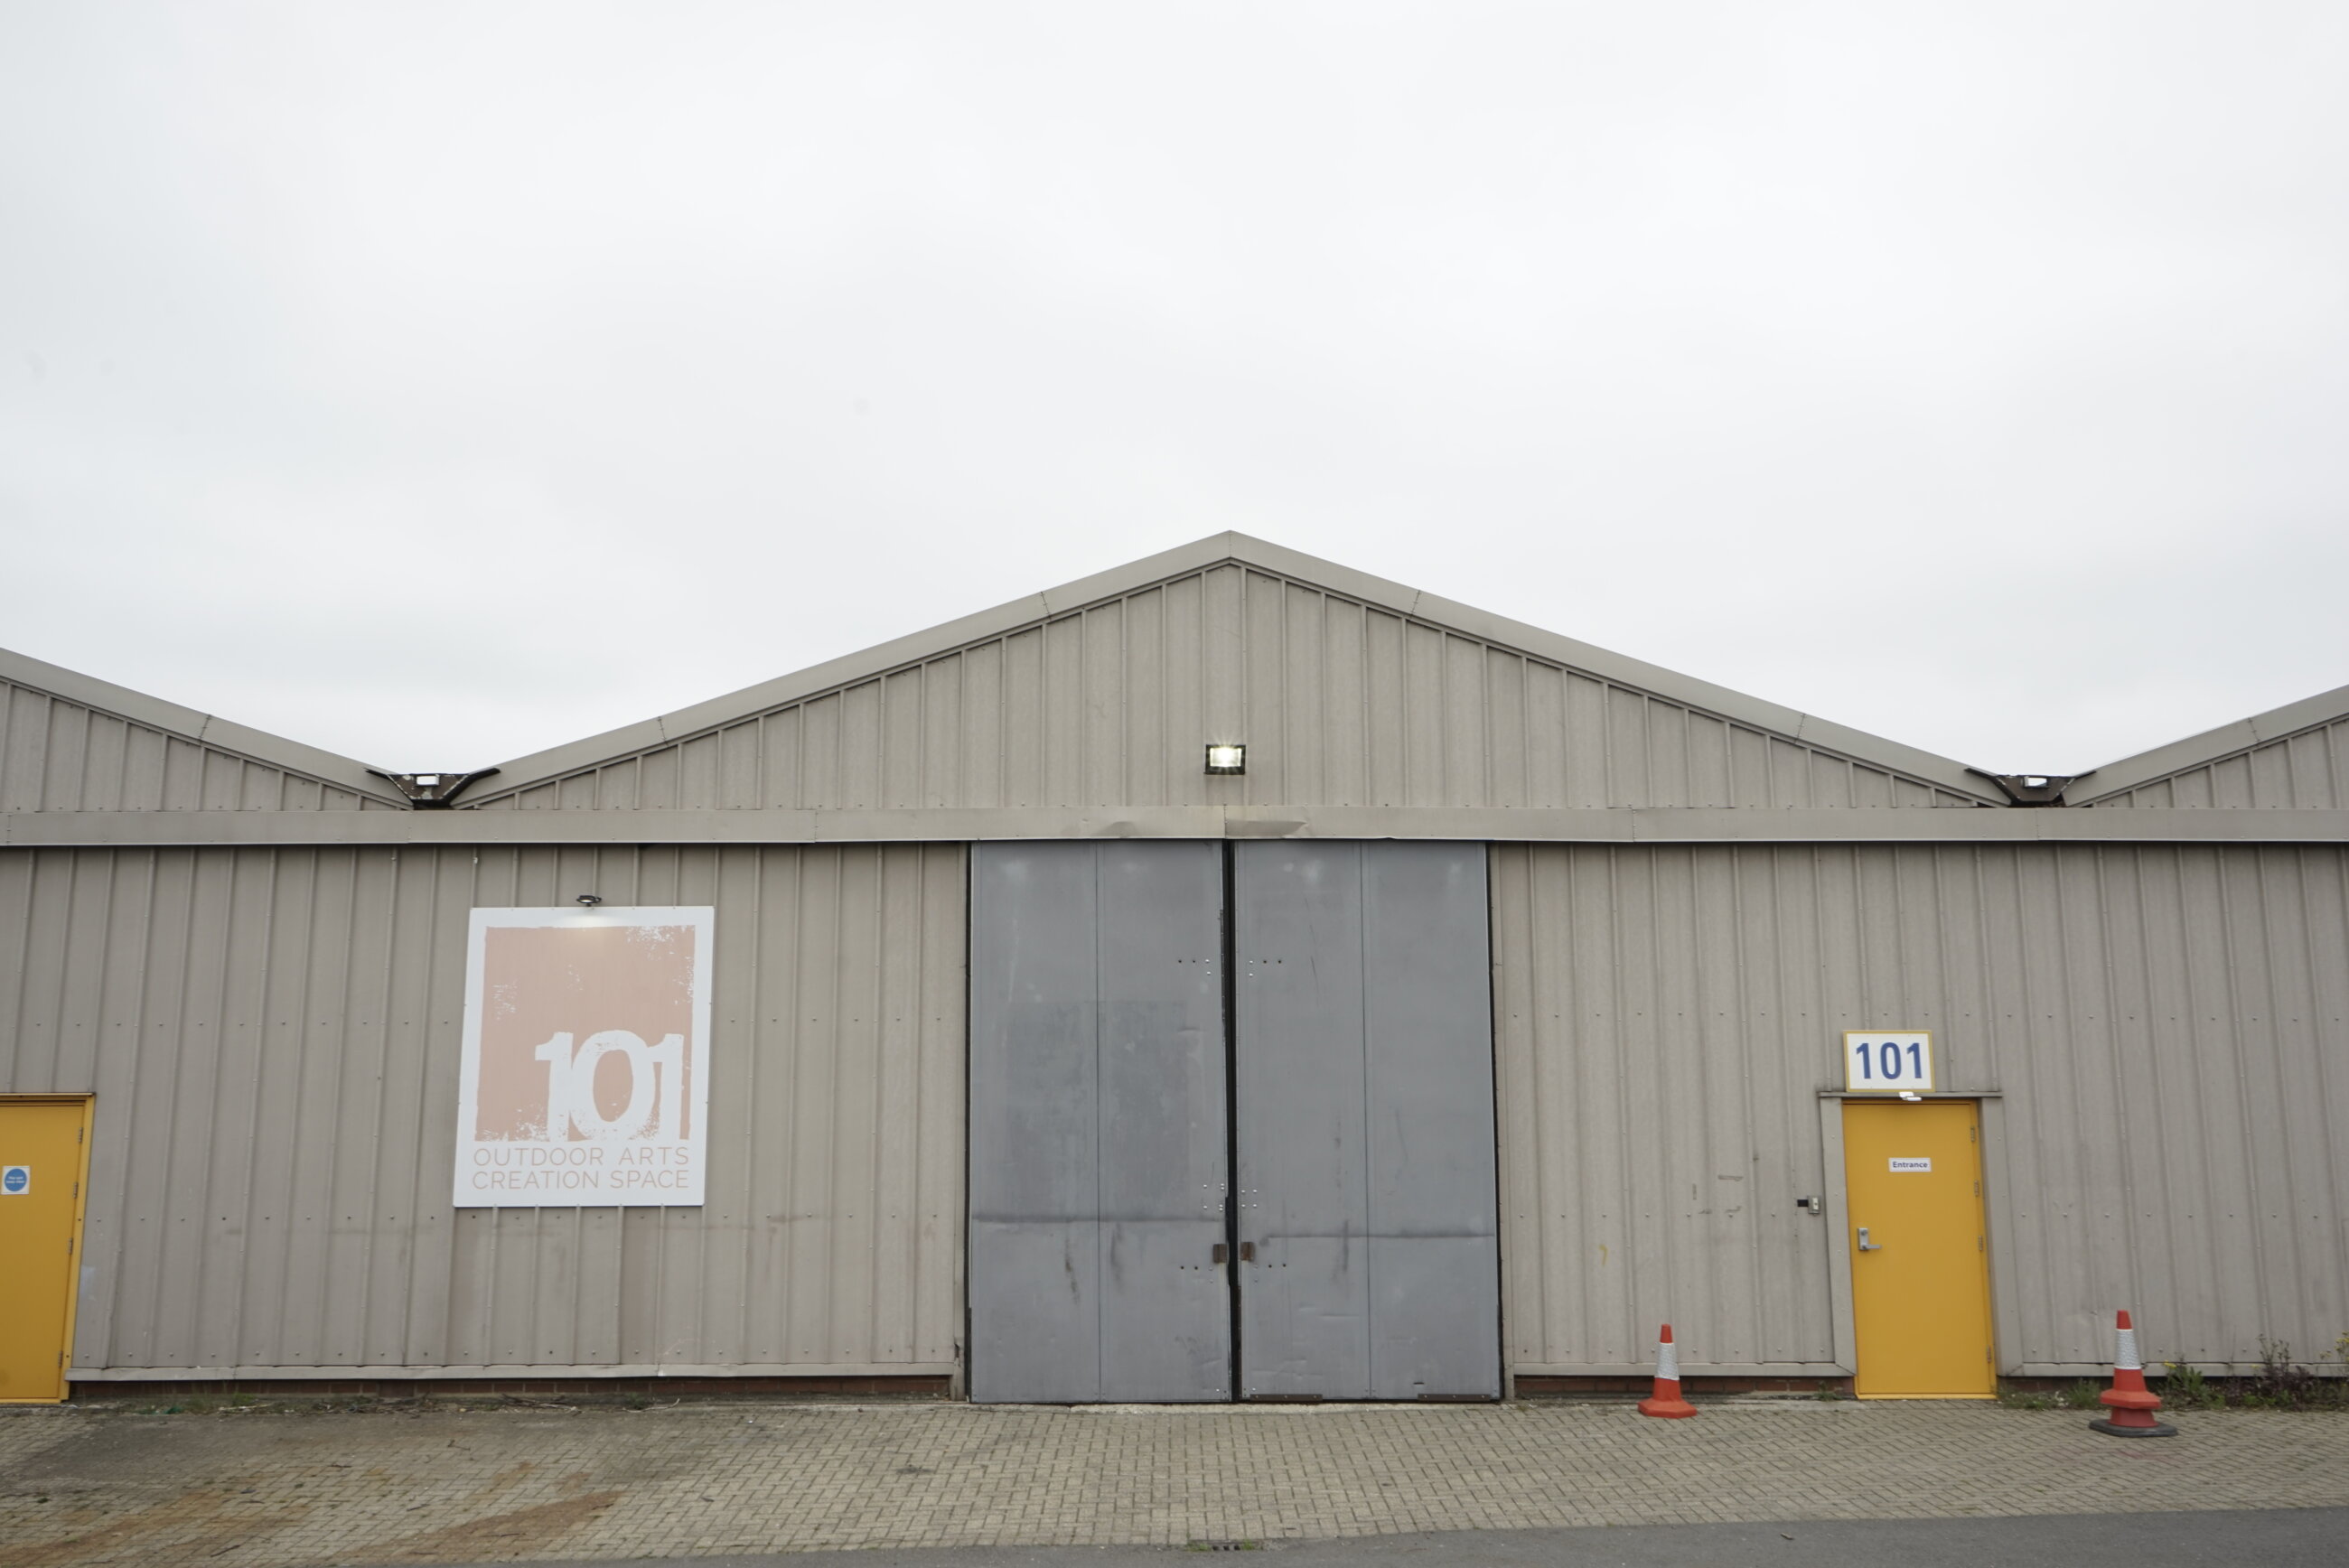 Front facade of 101 building. A grey warehouse with a pitched roof and orange doors and 101 sign